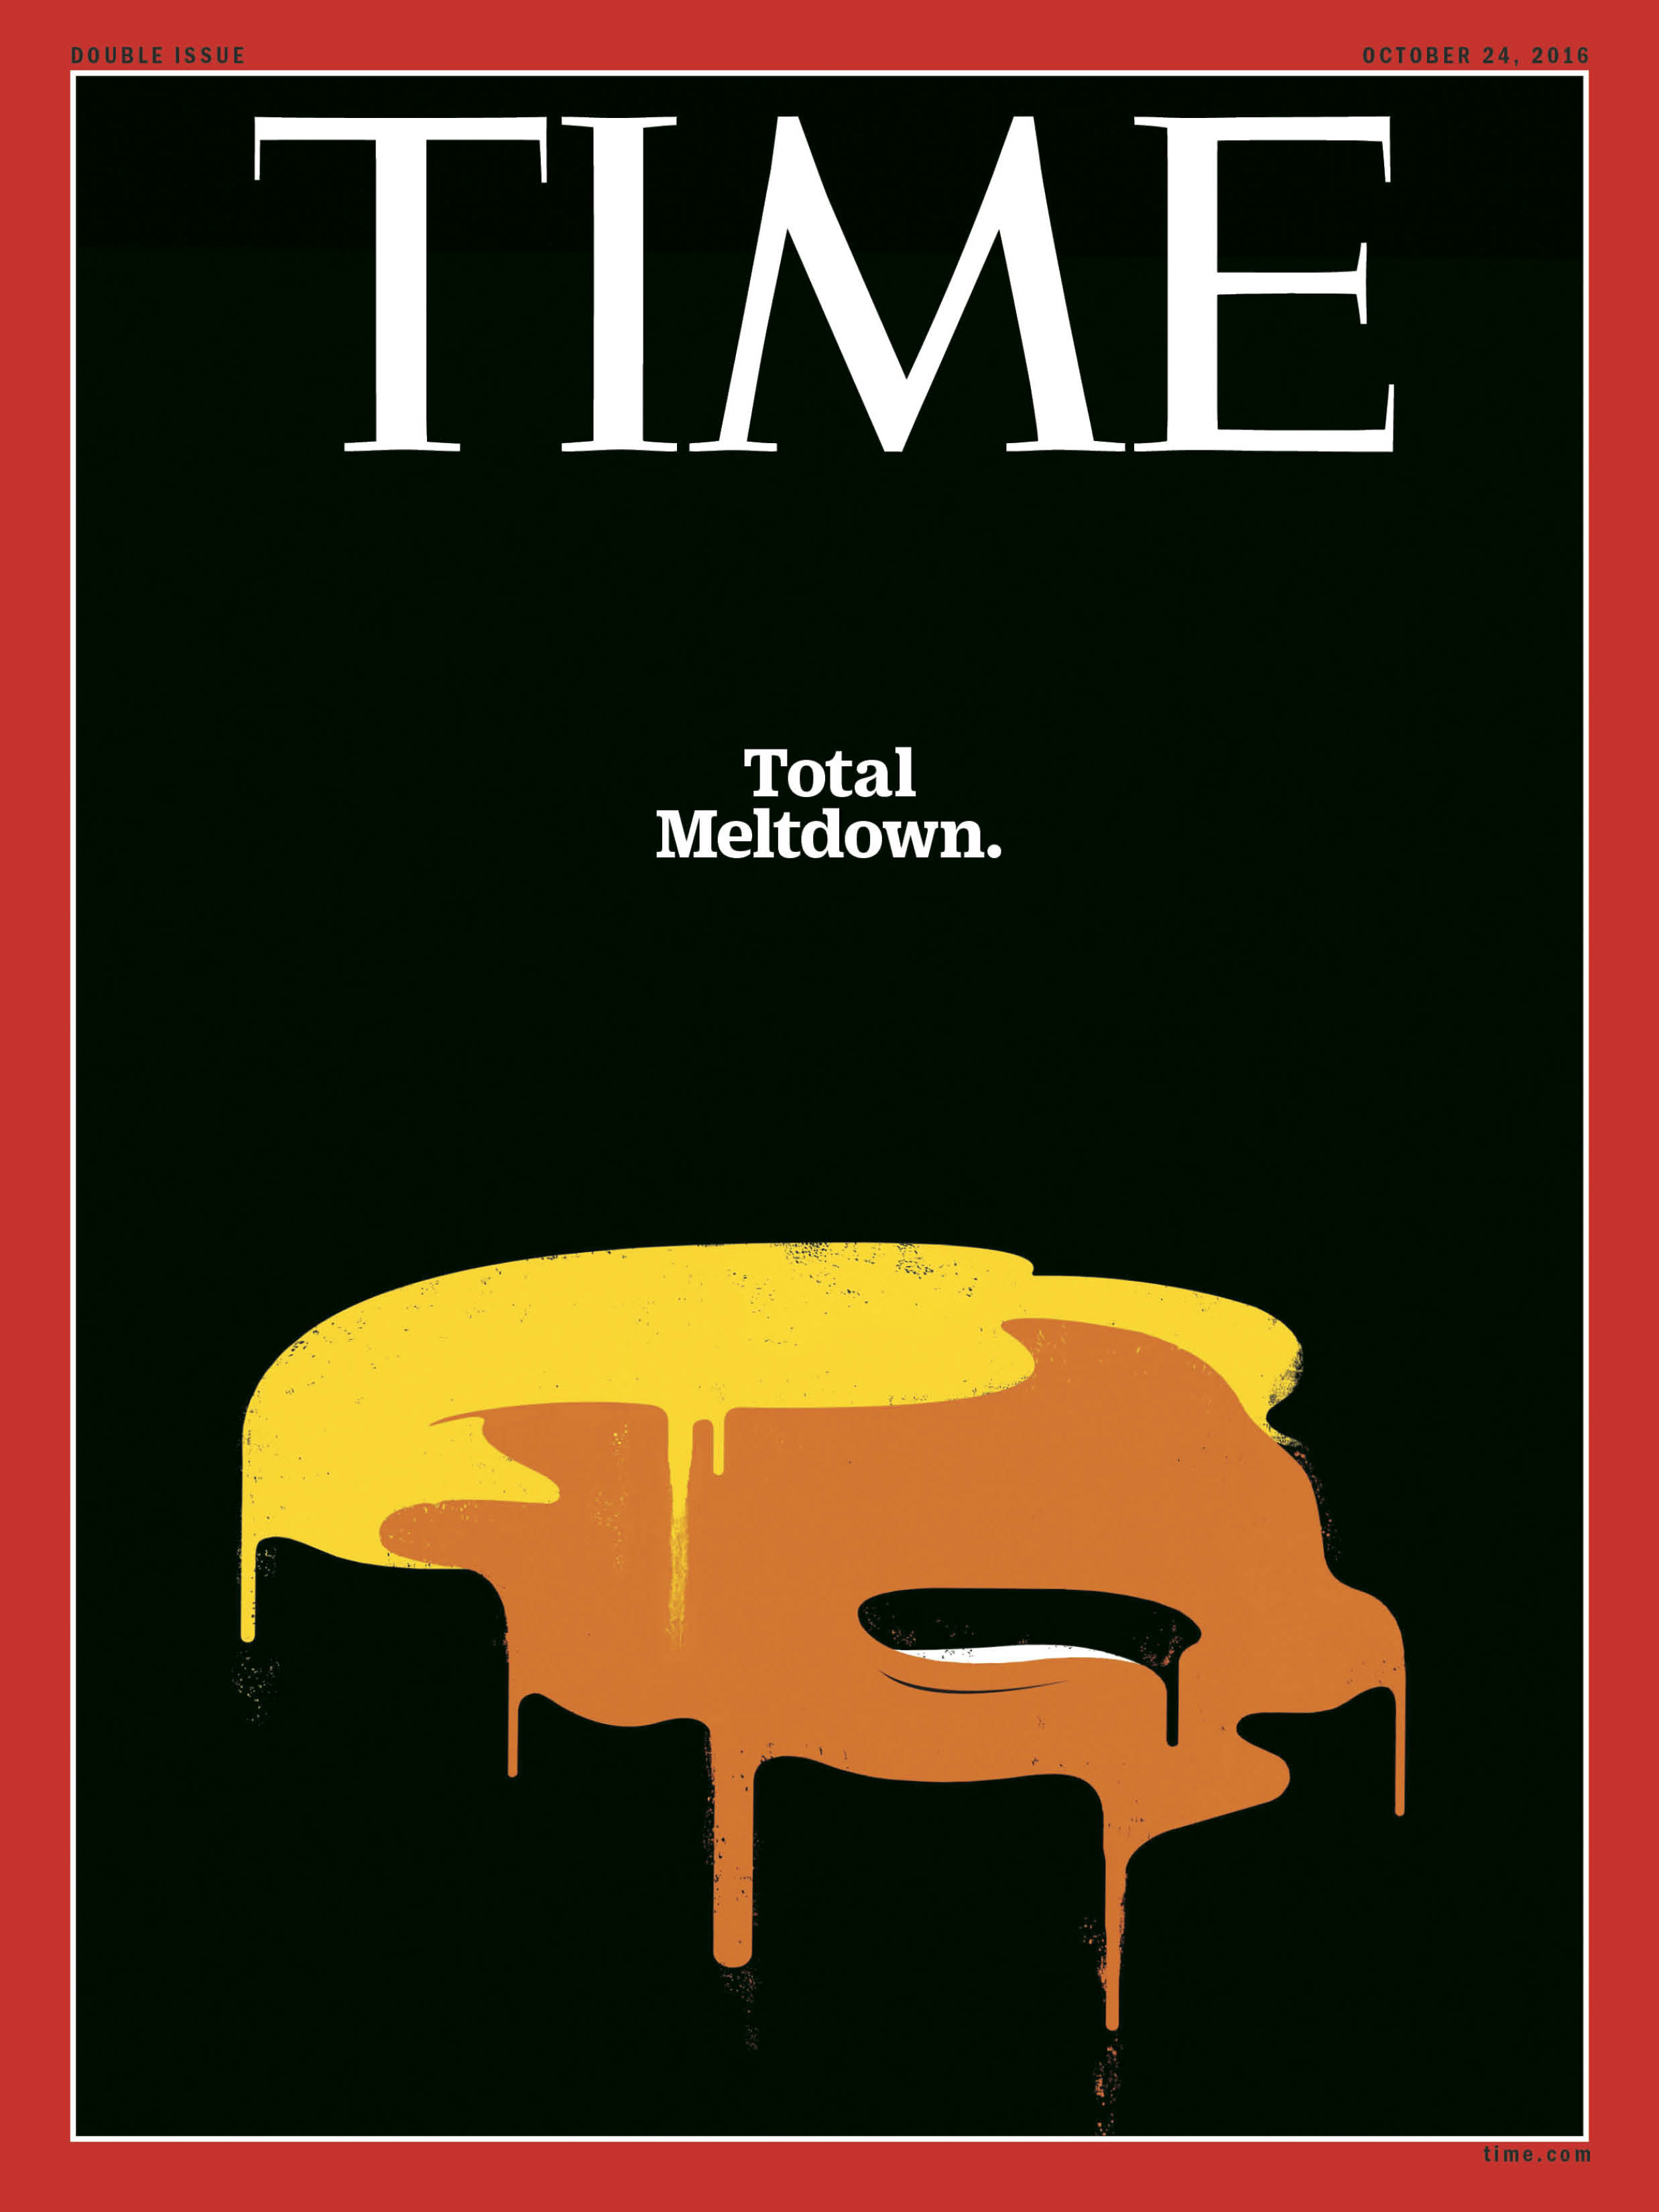 The Oct. 24, 2016, issue of TIME (Illustration by Edel Rodriguez for TIME)